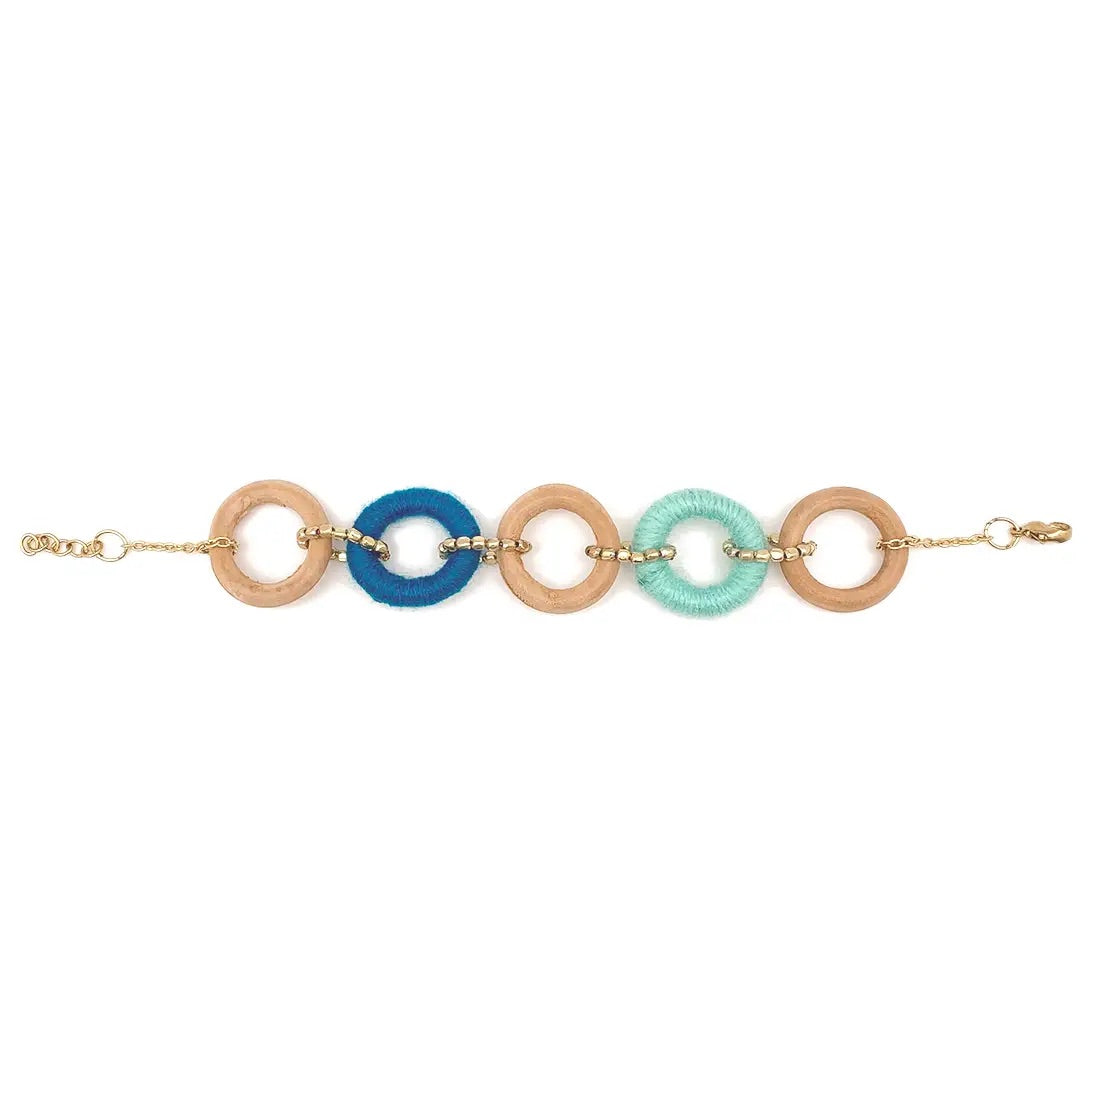 Sachi Bold Whimsy Collection Bracelet - Blue and Wood Rings